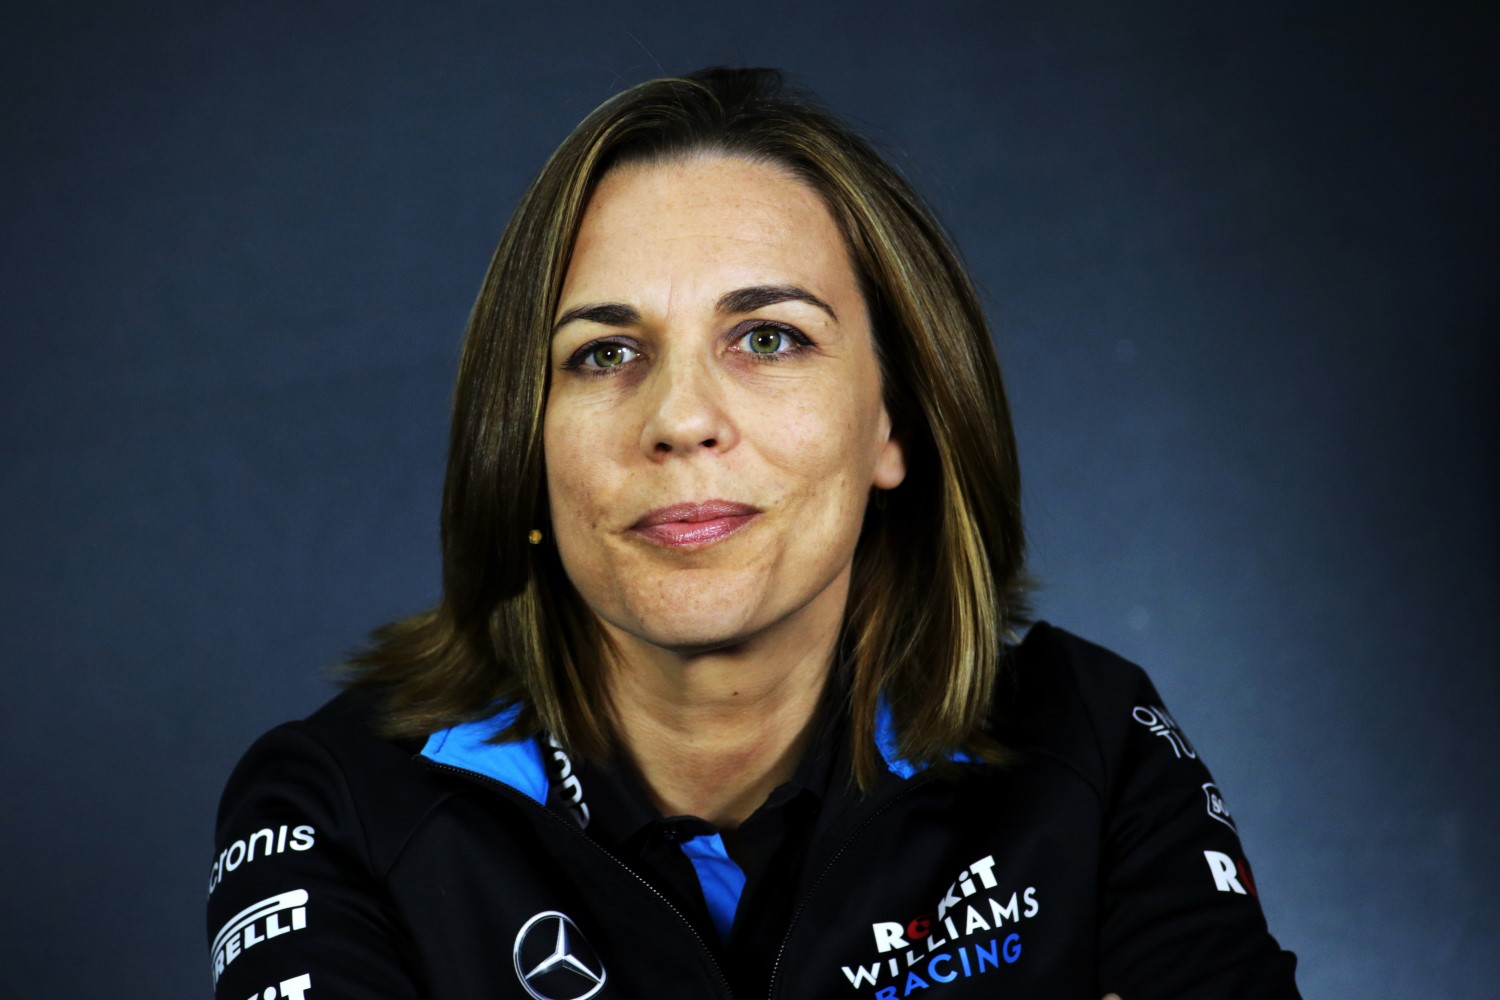 It's been all downhill under Claire Williams